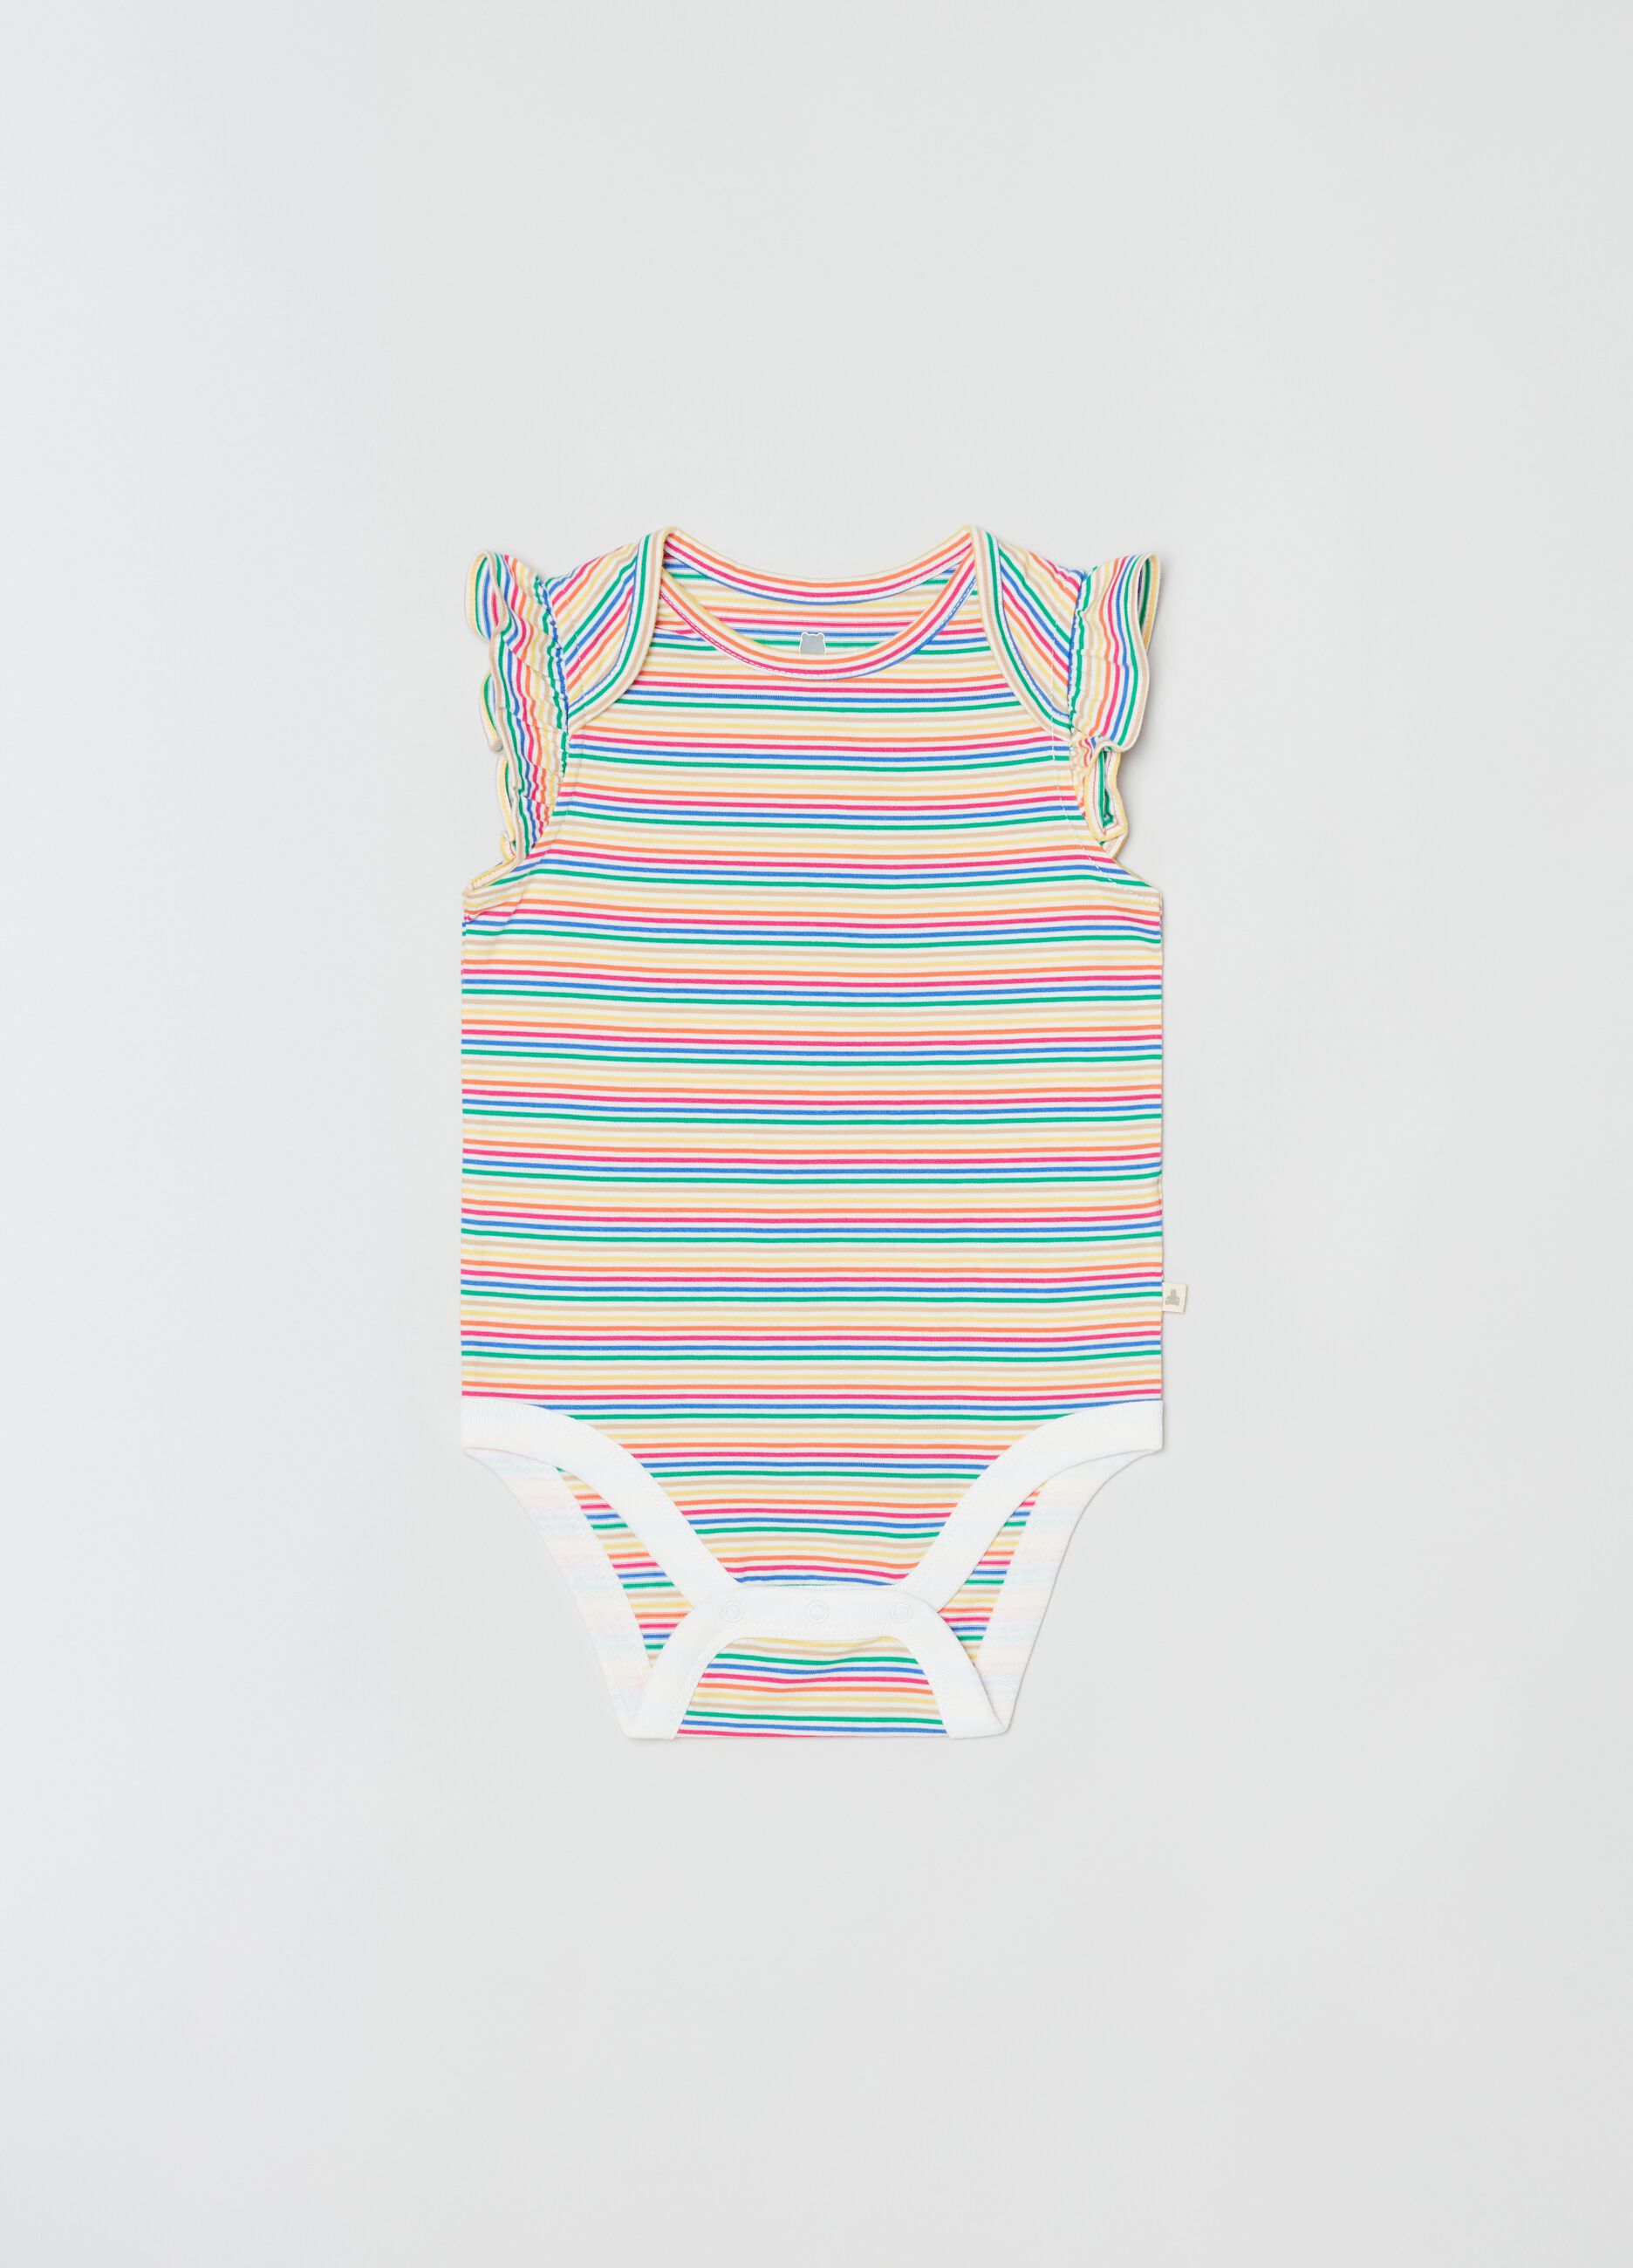 Striped bodysuit with ruffles